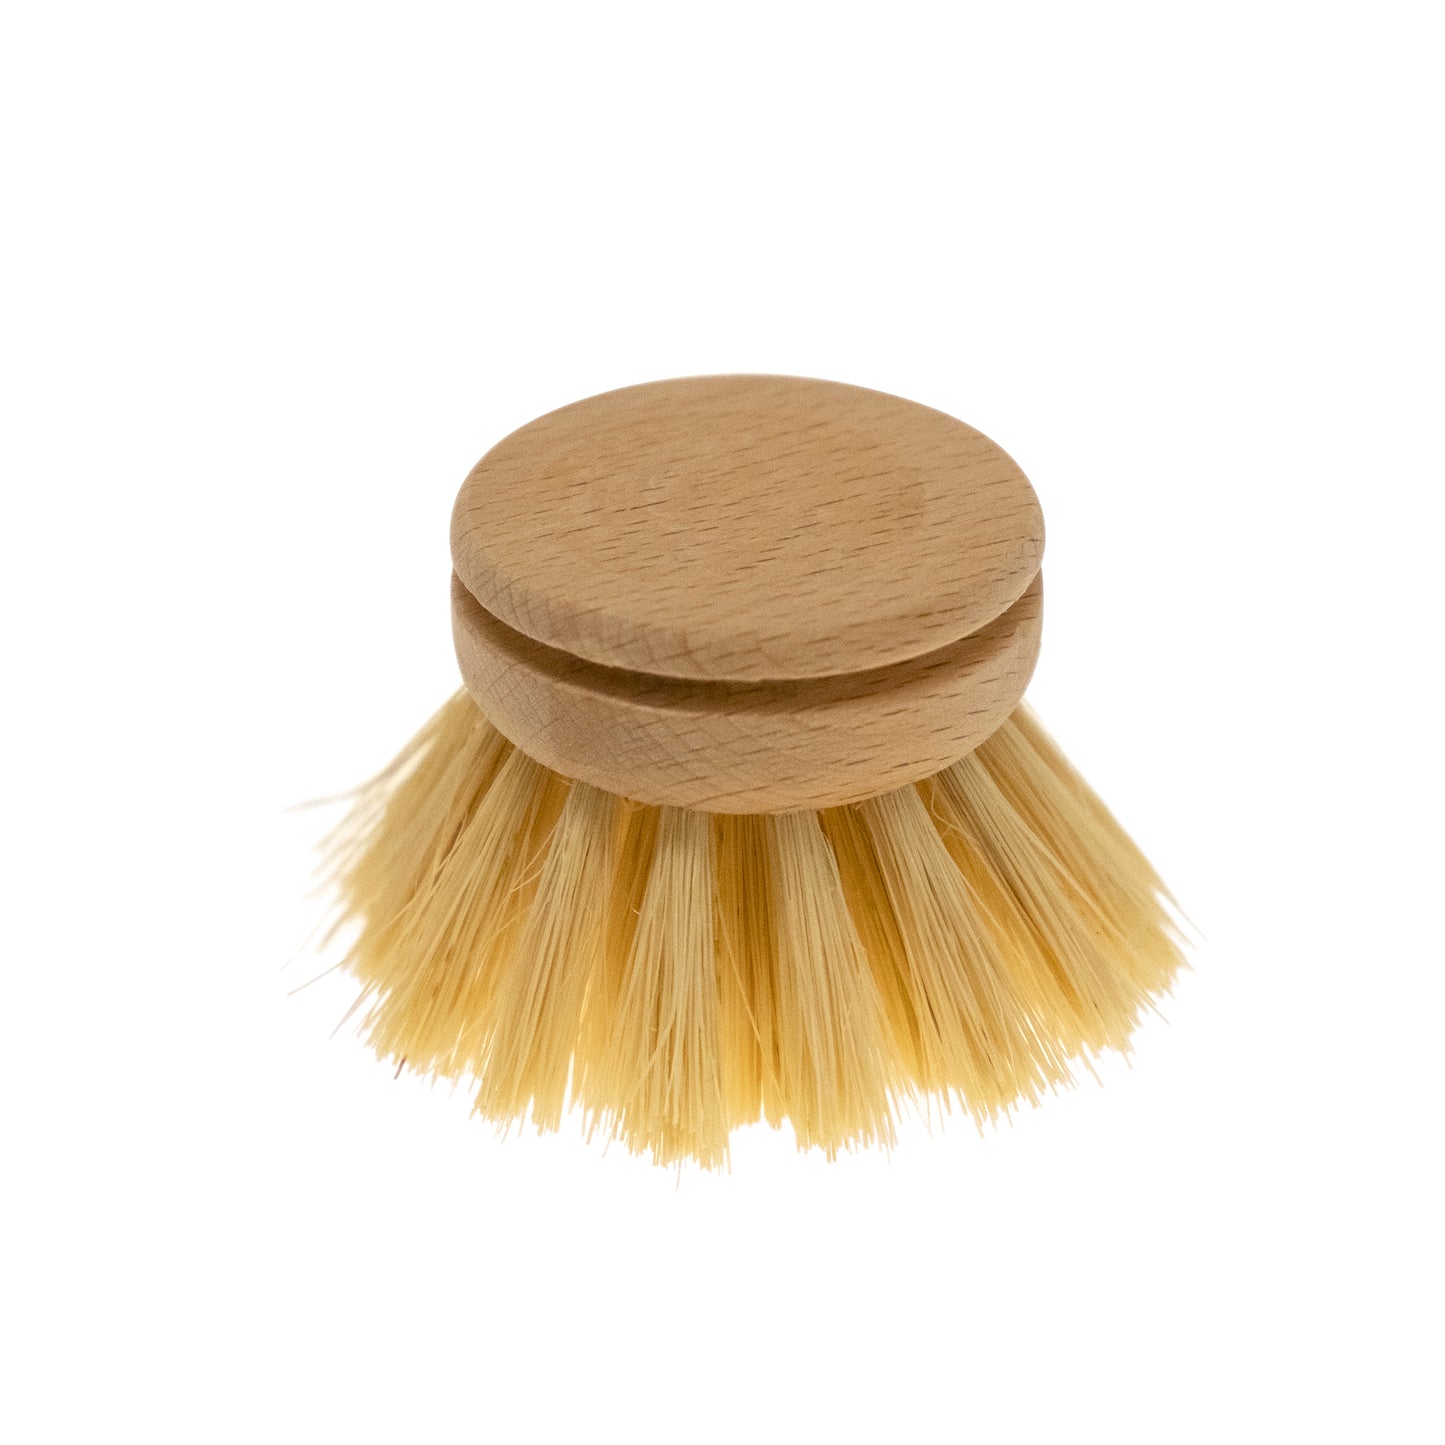 Scrubby Natural Dish Brush Replacement Head